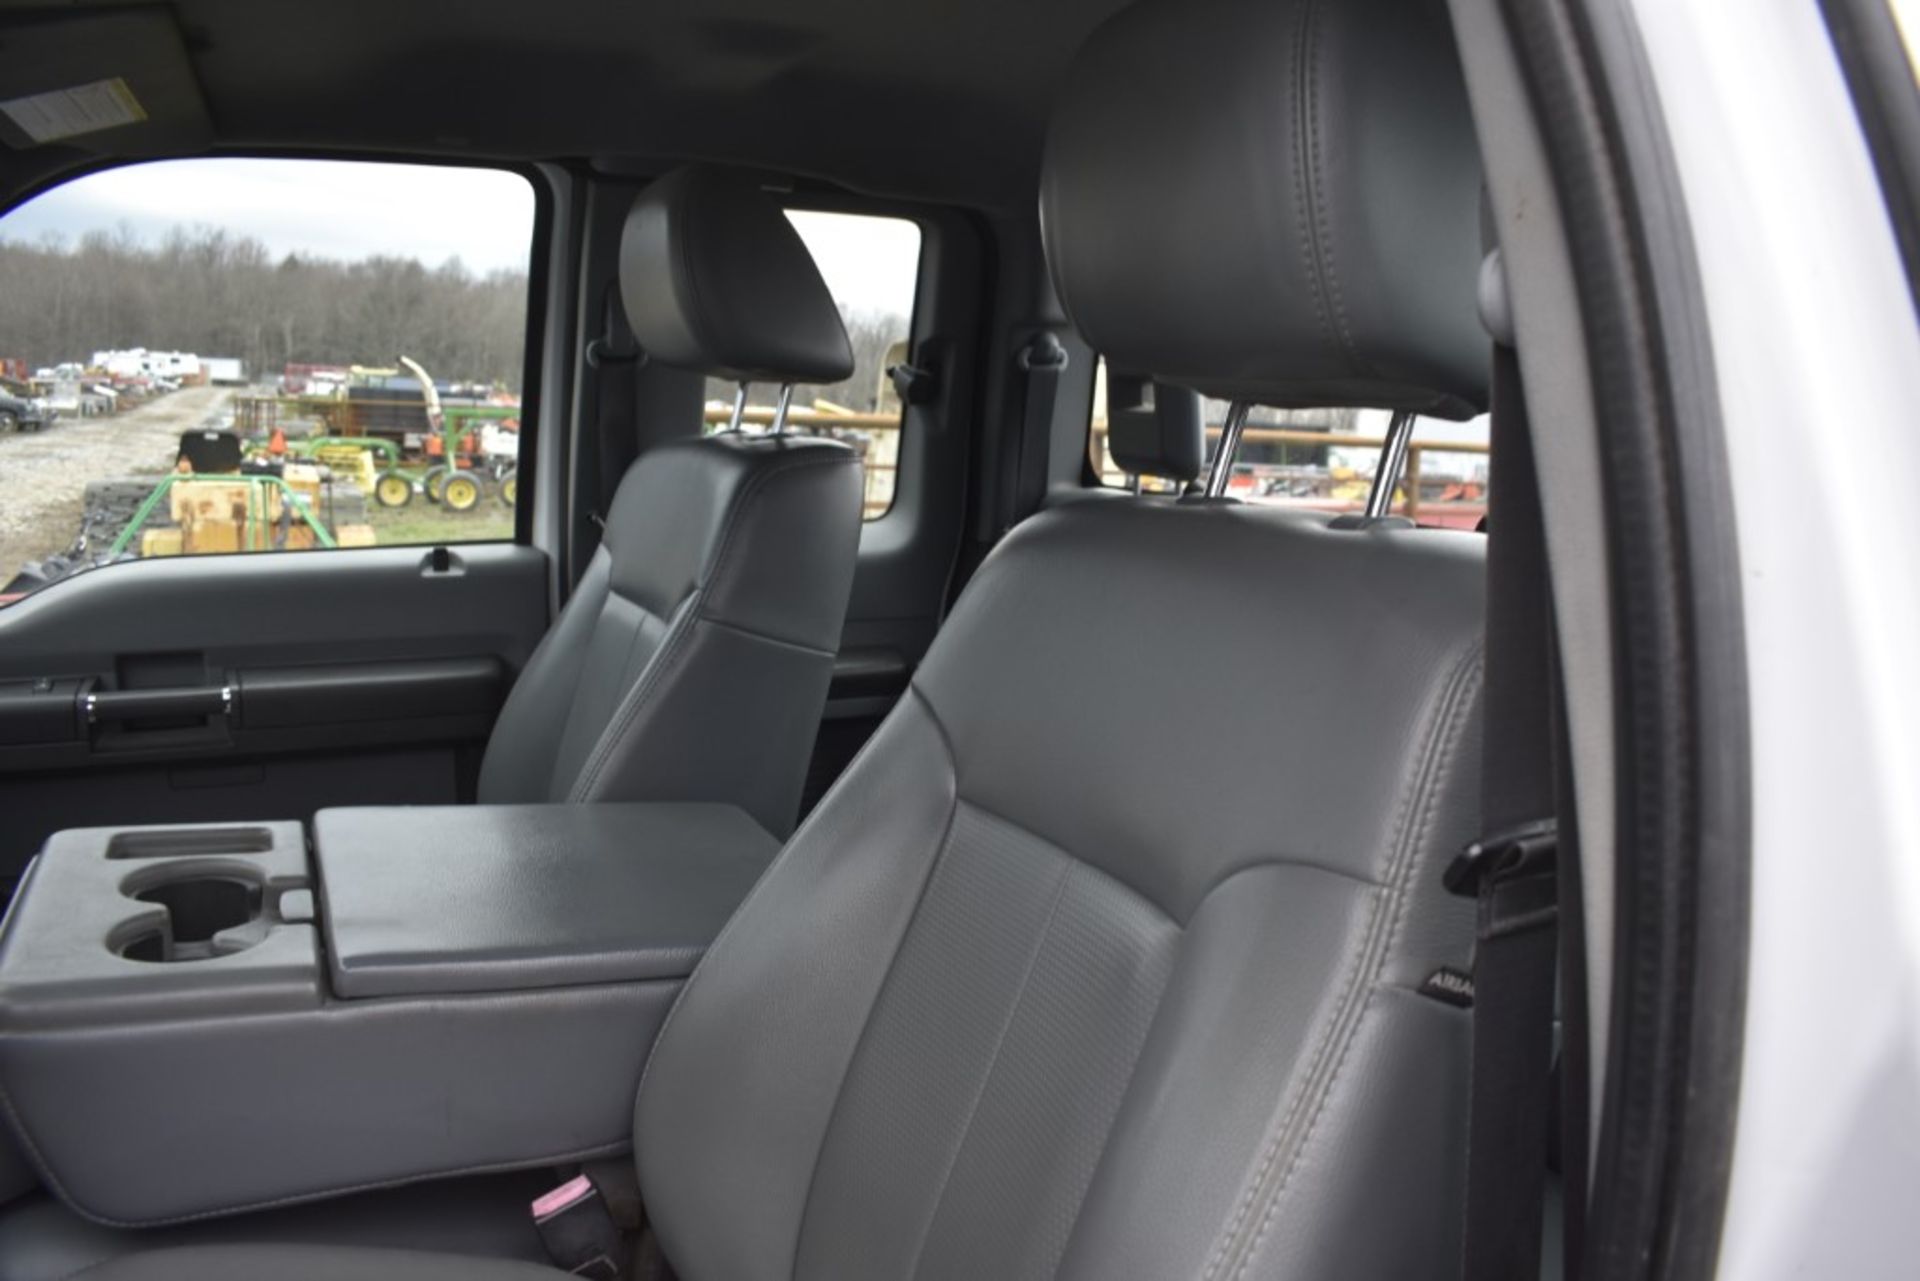 2011 Ford F-250 Super Duty Truck - Image 31 of 40